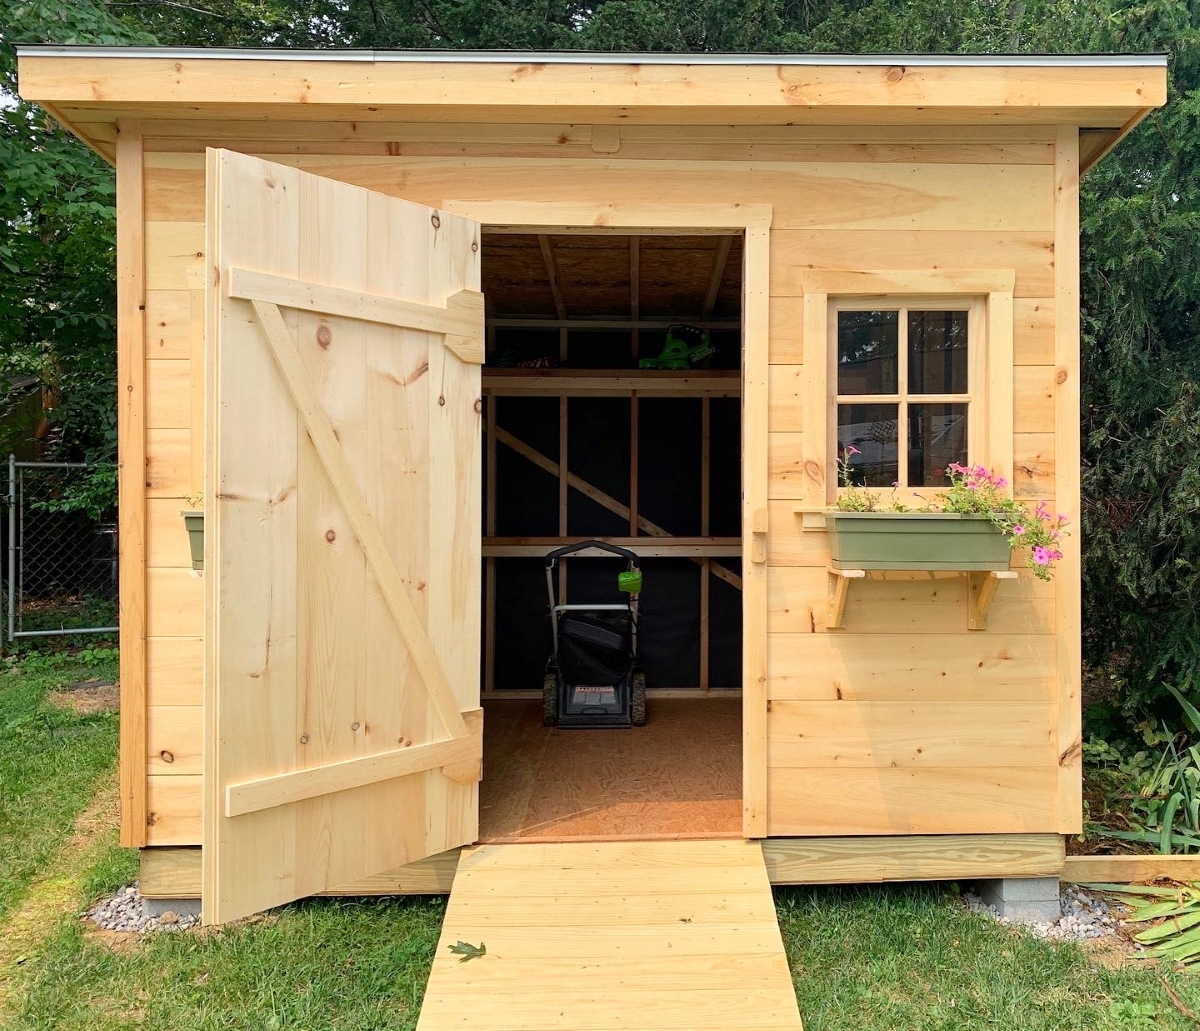 A newly built wooden shed in the backyard.